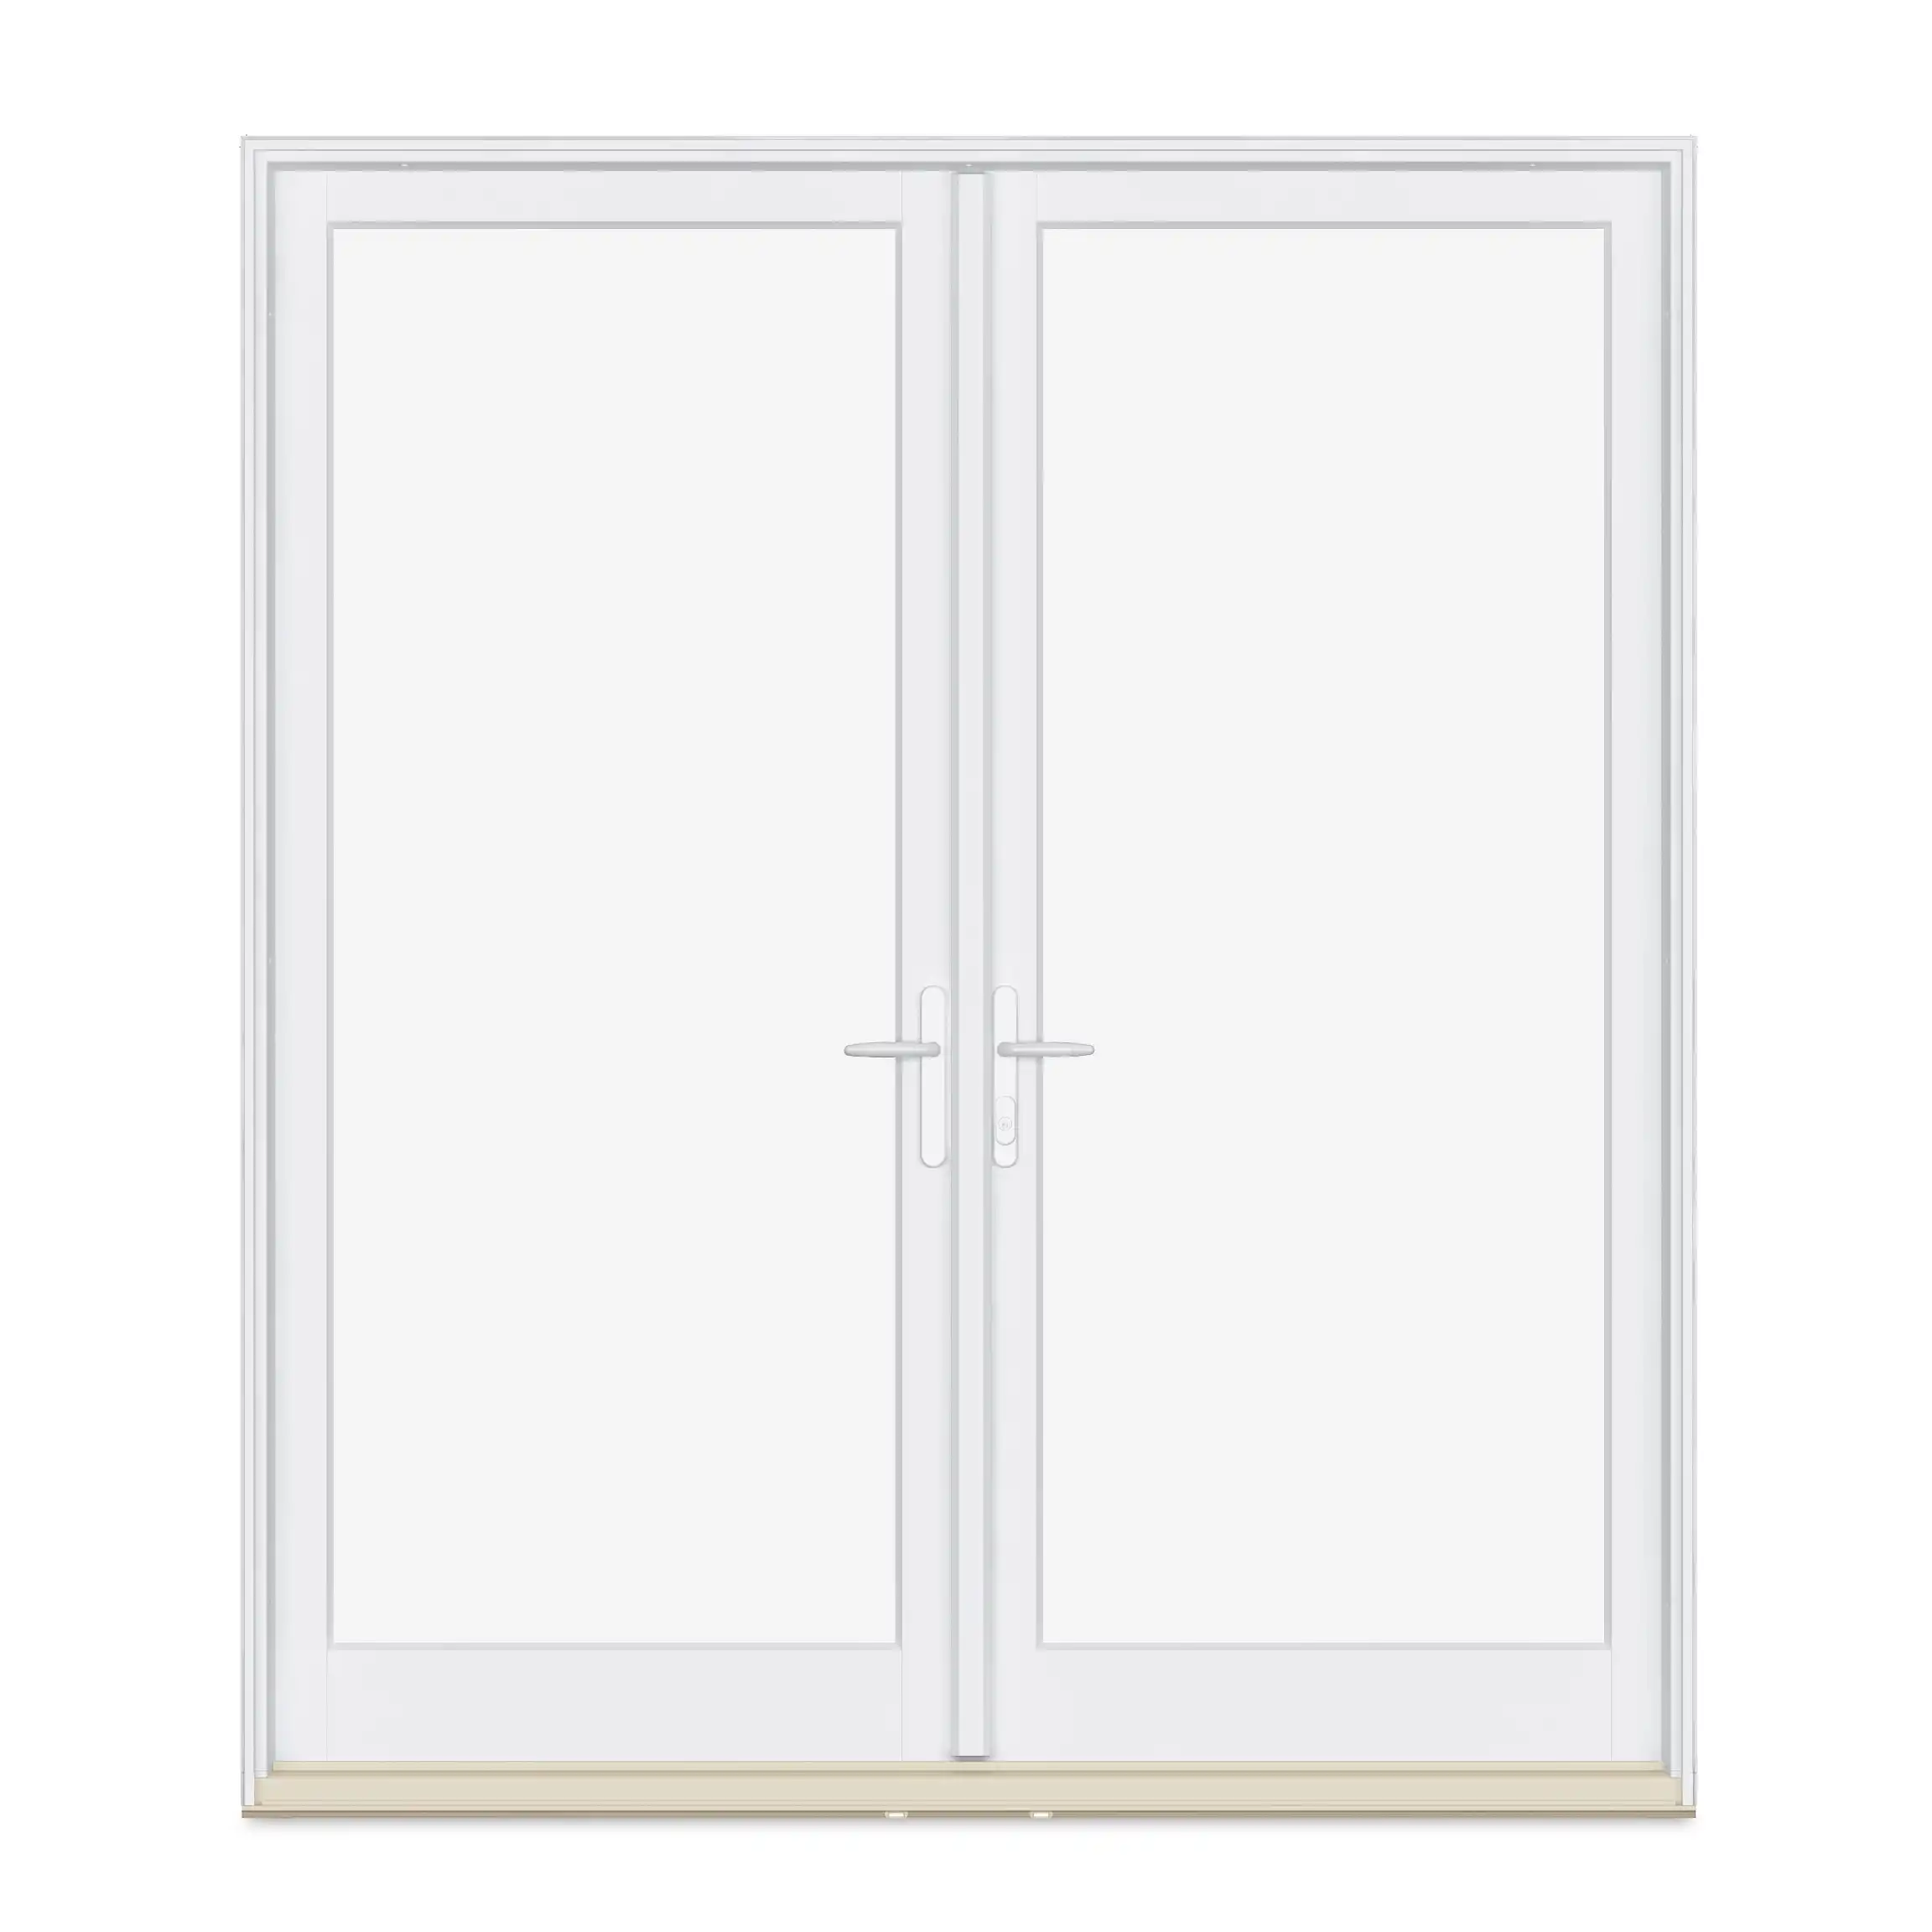 A white Marvin Replacement two-panel Inswing French door with a white Northfield style handle and beige door sill.